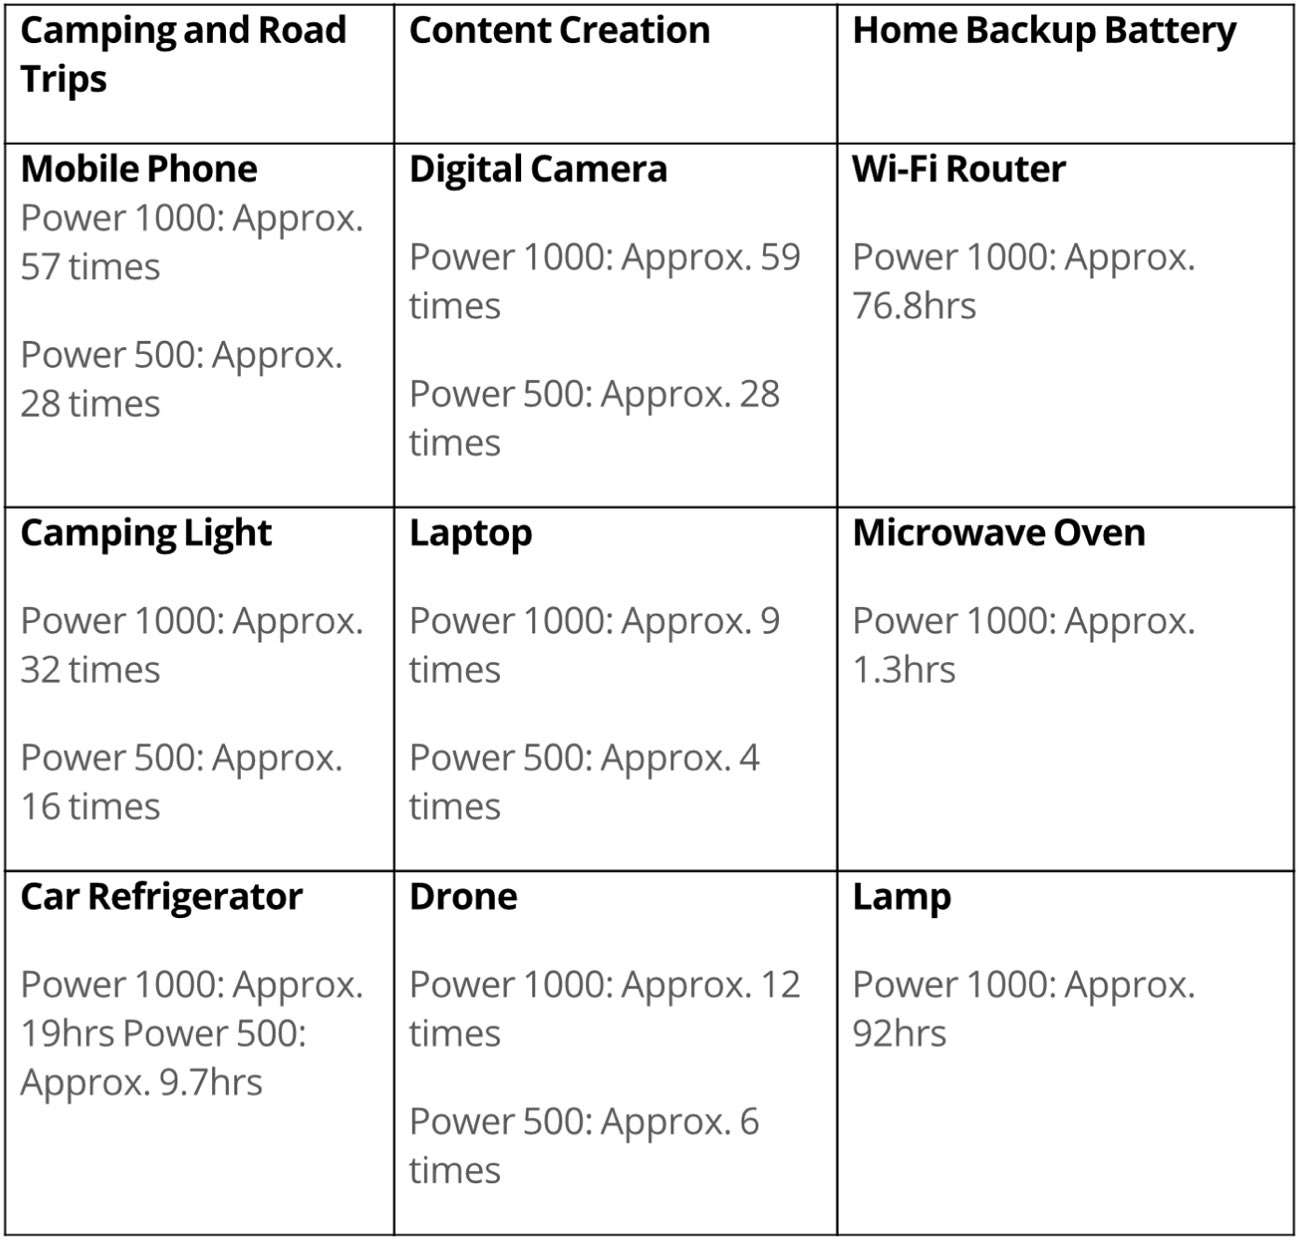 dji-power-1000-and-power-500-portable-power-stations-chart